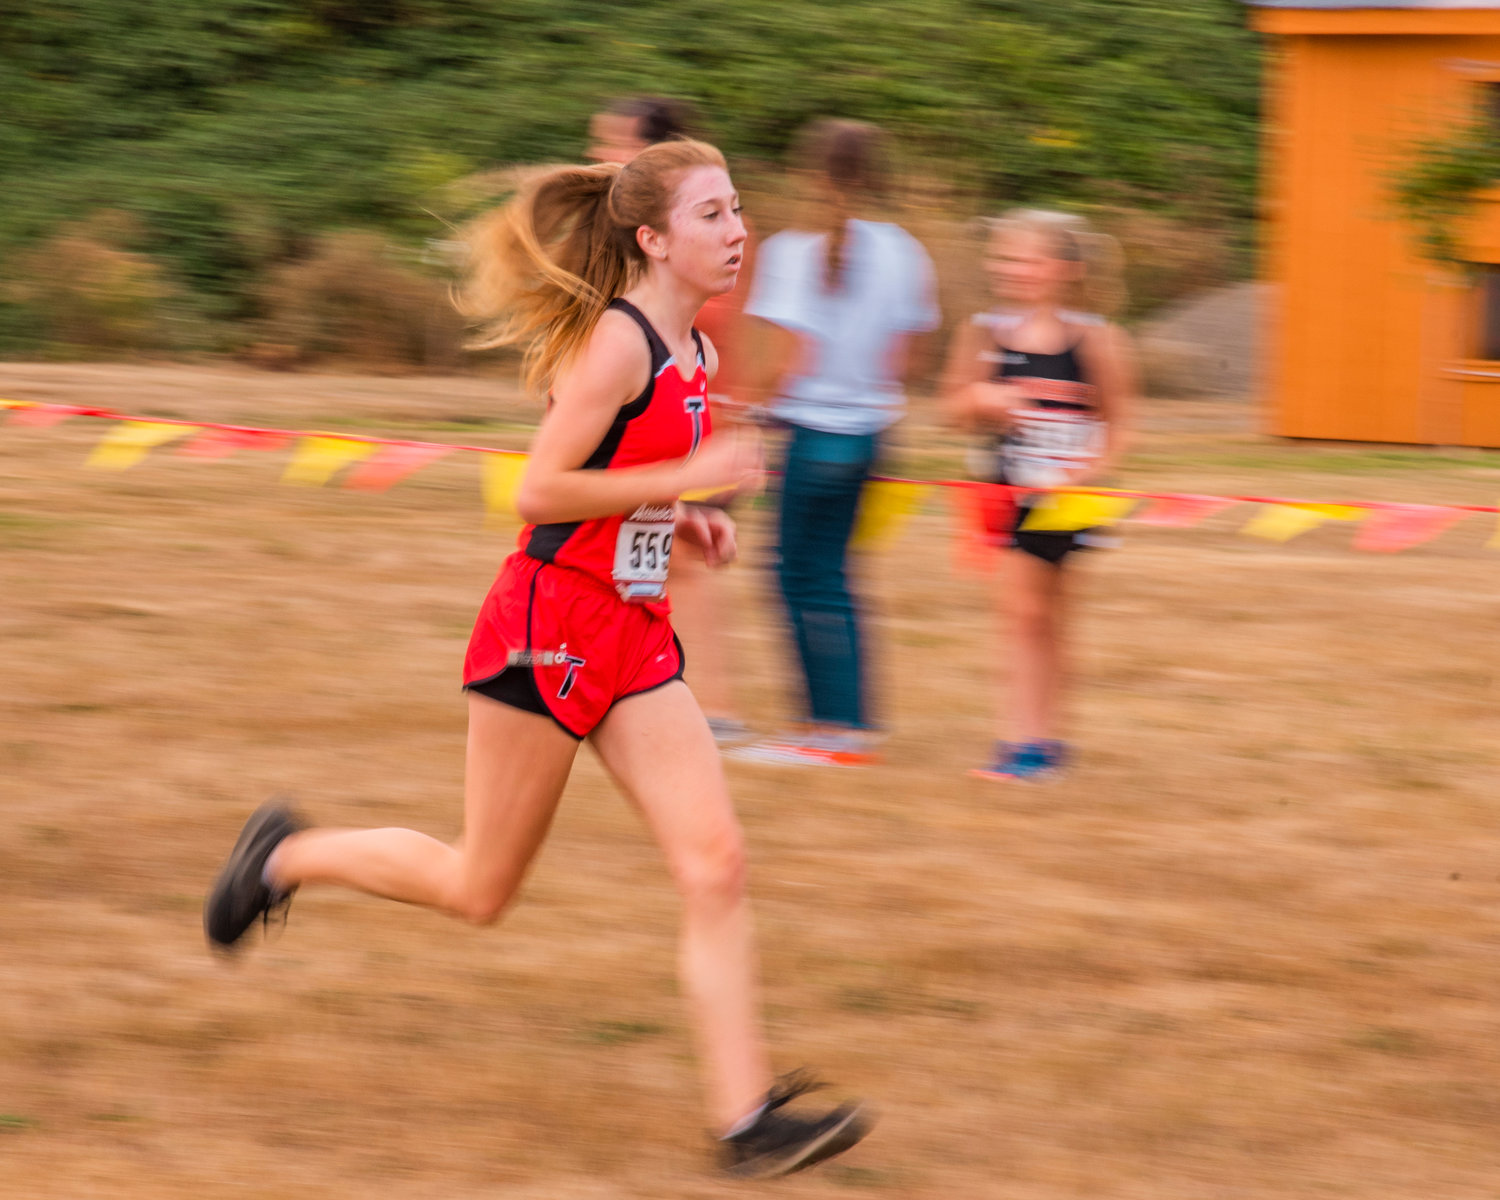 FILE PHOTO -- Toledo’s Karley Harris runs towards the finish line during a cross country meet on Sept. 16, 2021.